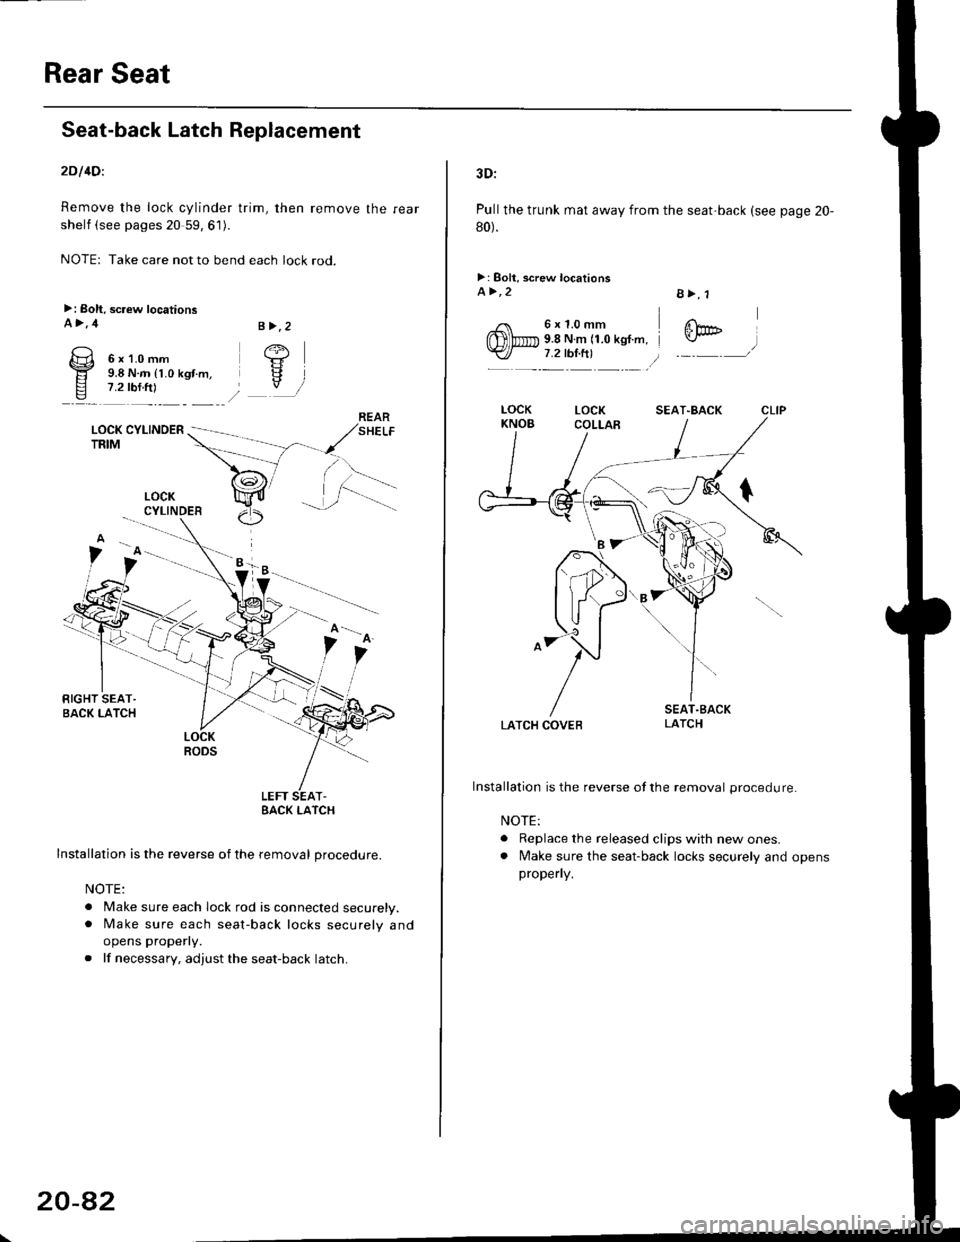 HONDA CIVIC 1996 6.G Workshop Manual Rear Seat
Seat-back Latch Replacement
2Dl4Dl
Remove the lock cylinder trim, then remove the rear
shelf (see pages 20 59, 61).
NOTE: Take care not to bend each lock rod.
>: Boh, screw locationsA>,4
6x1